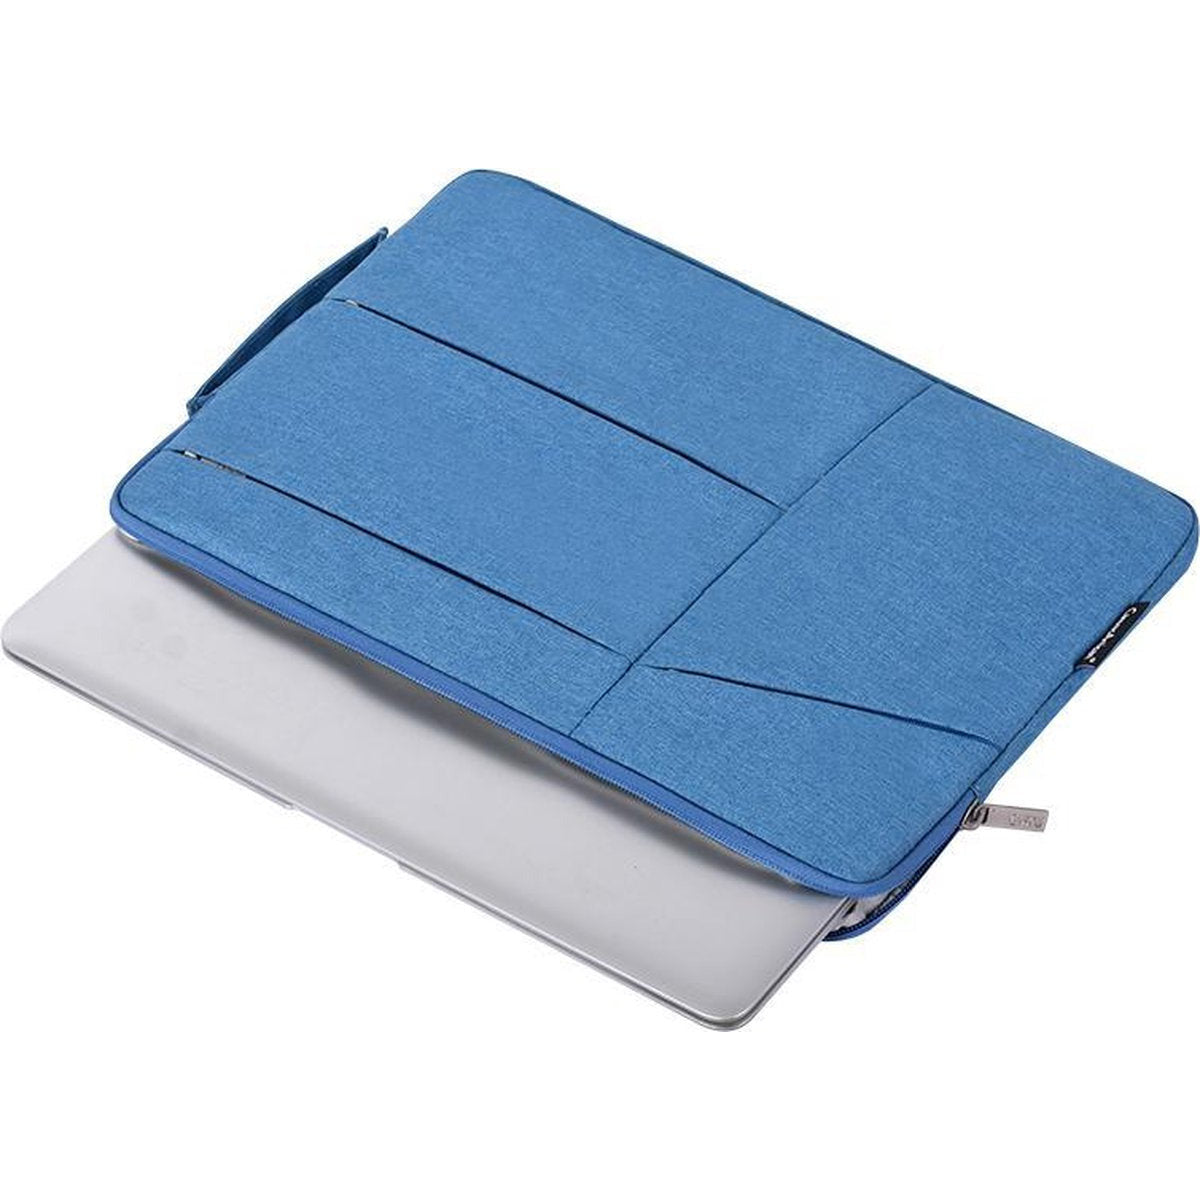 Laptophoes 12 Inch - XV Sleeve - Blauw